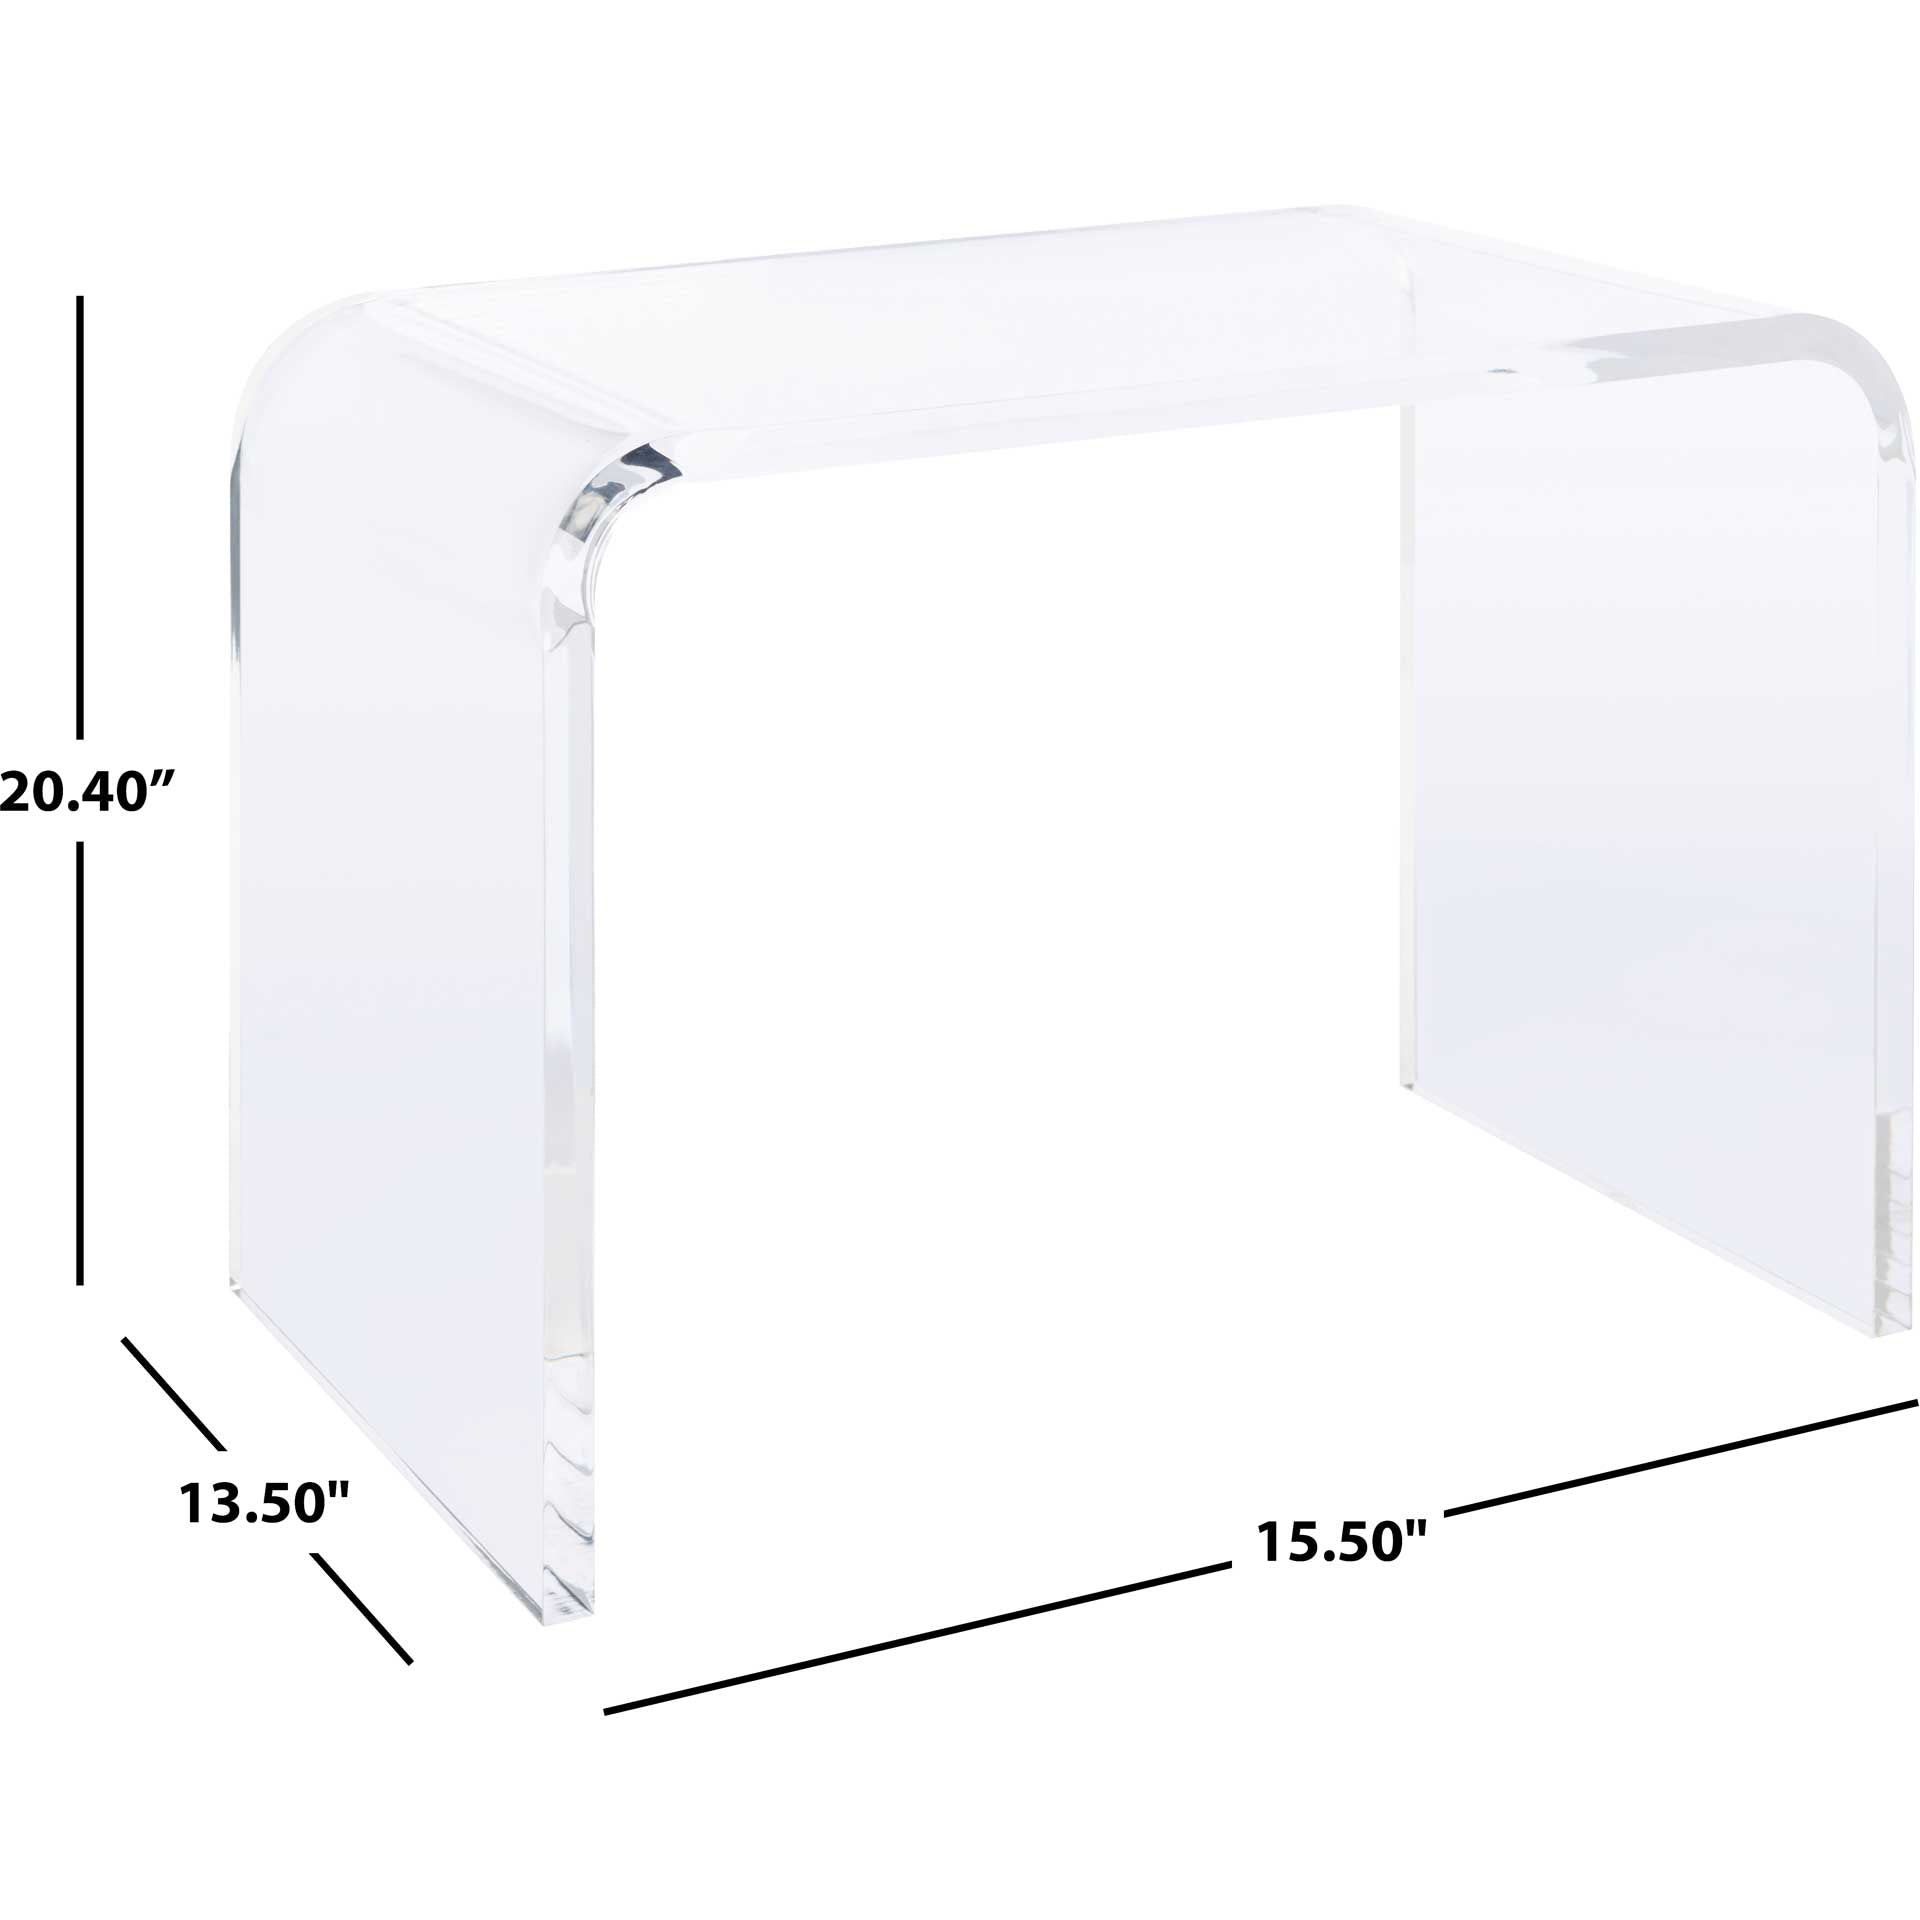 Upen Acrylic Side Table Clear